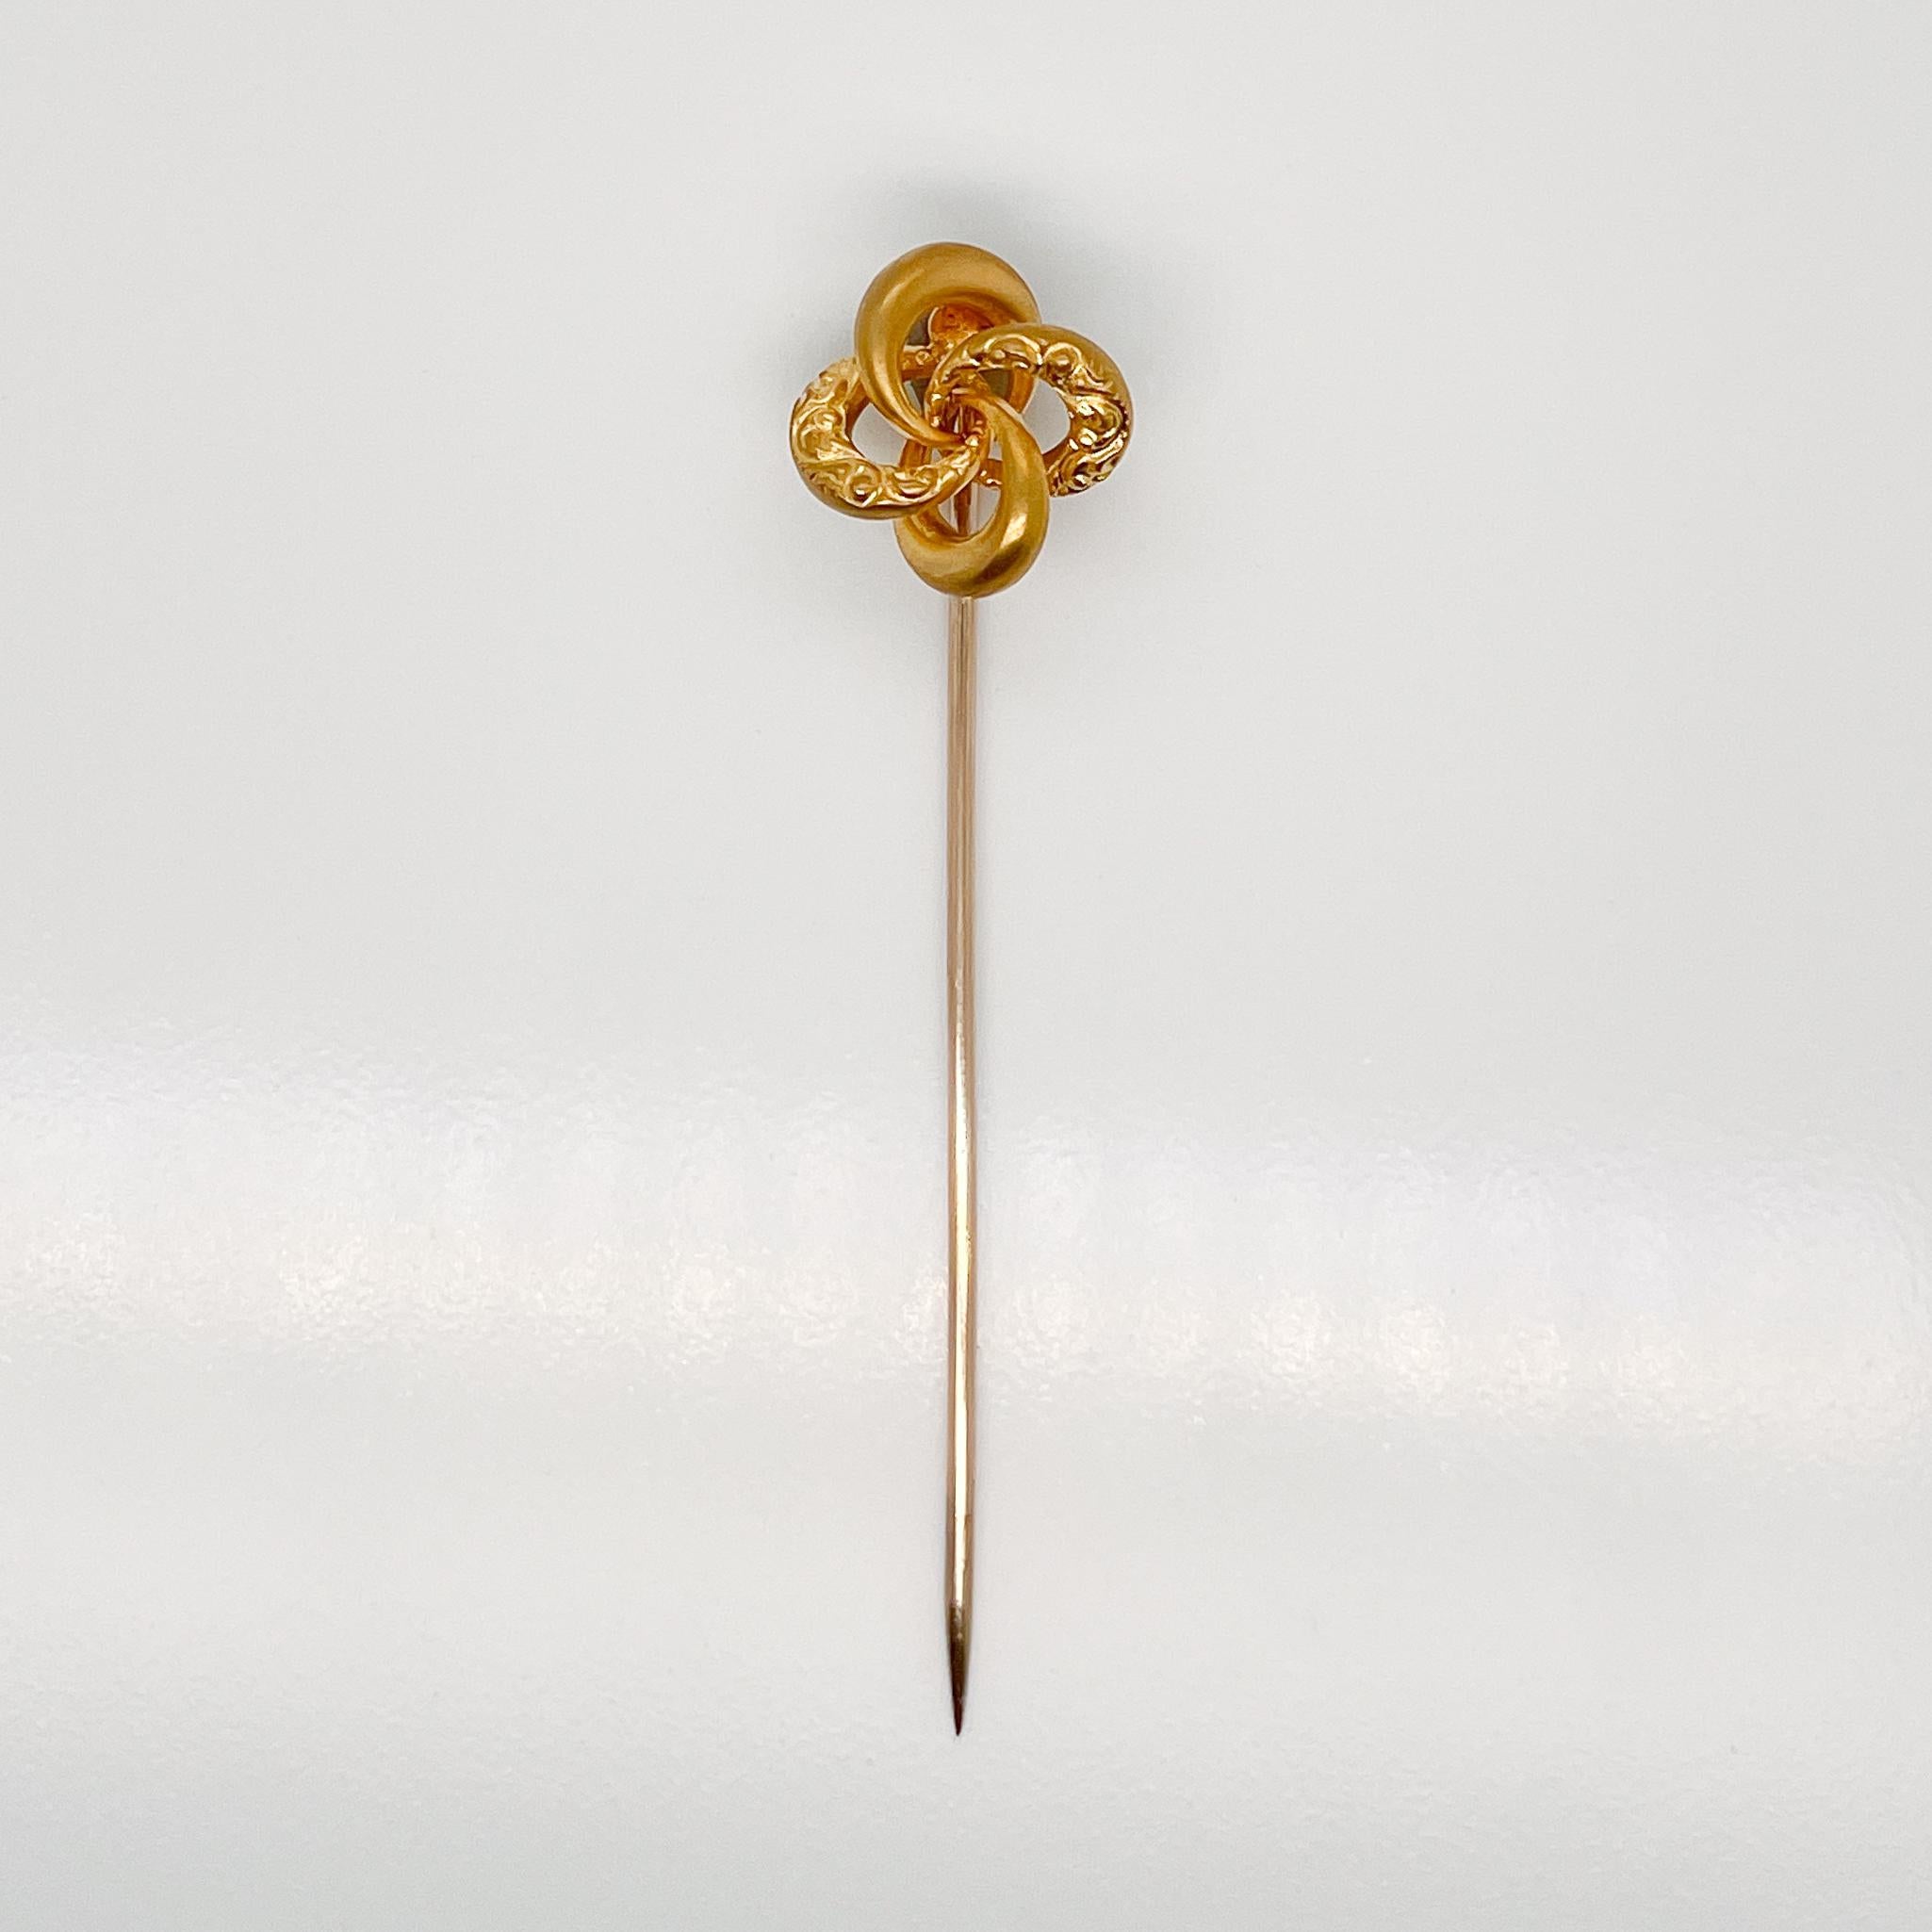 A very fine Late Victorian 10k gold love knot stick pin.

With four interlocking circle shapes in a traditional Victorian Love Knot.

Two links are etched filigree patterns.

Simply a great stickpin!

Date:
Early 20th Century

Overall Condition:
It